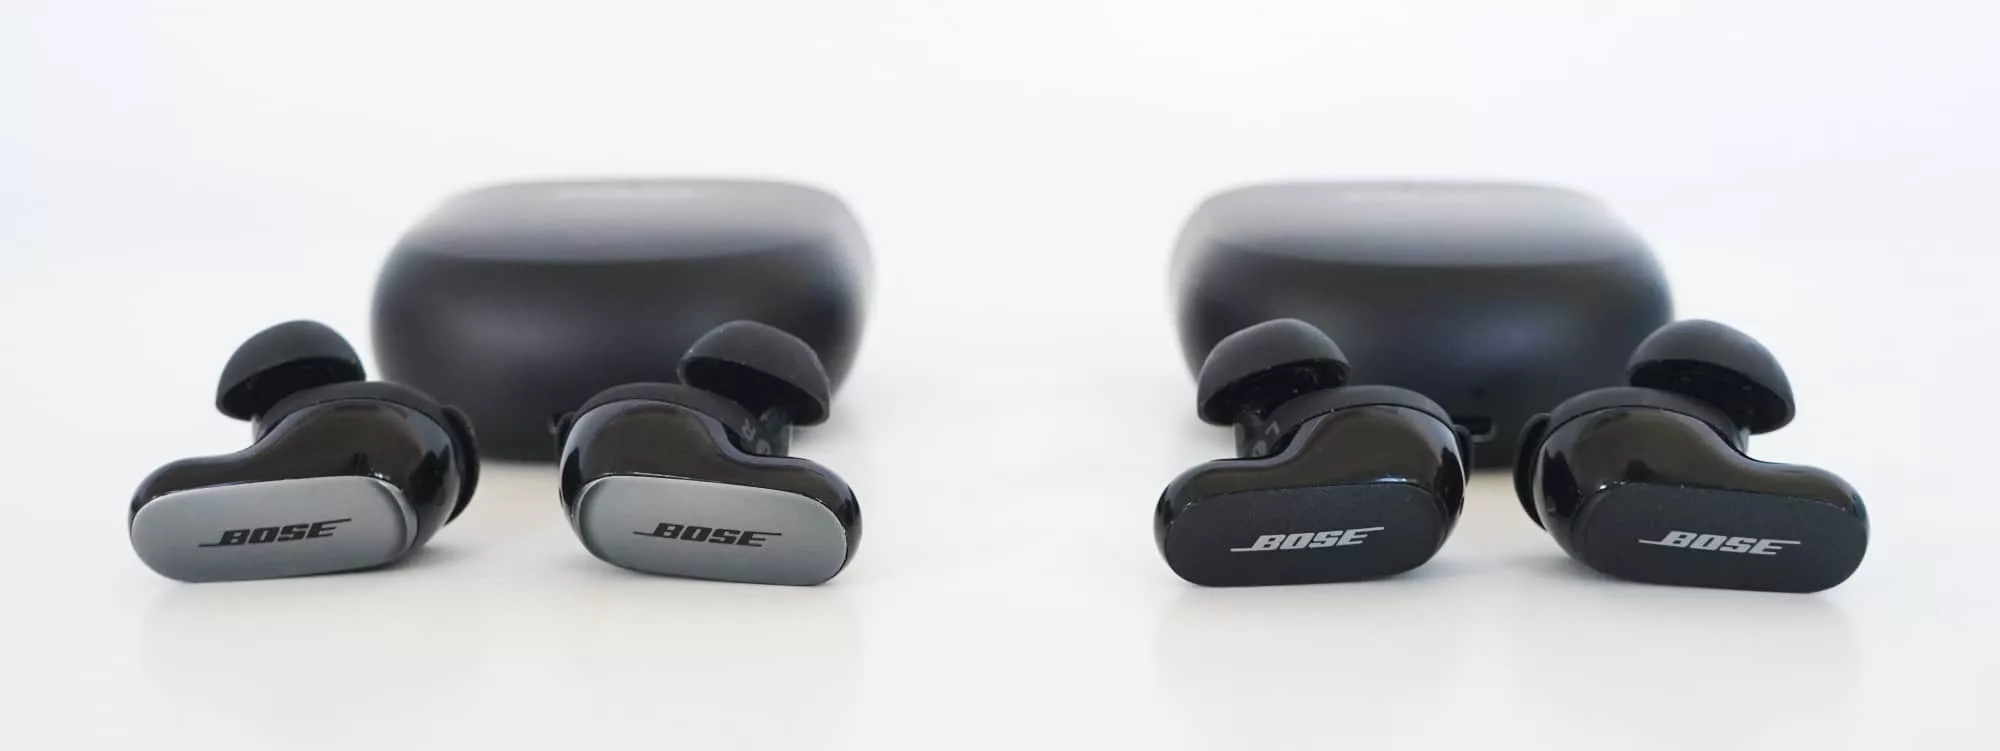 Bose QuietComfort Ultra Earbuds review: Immersive experiences